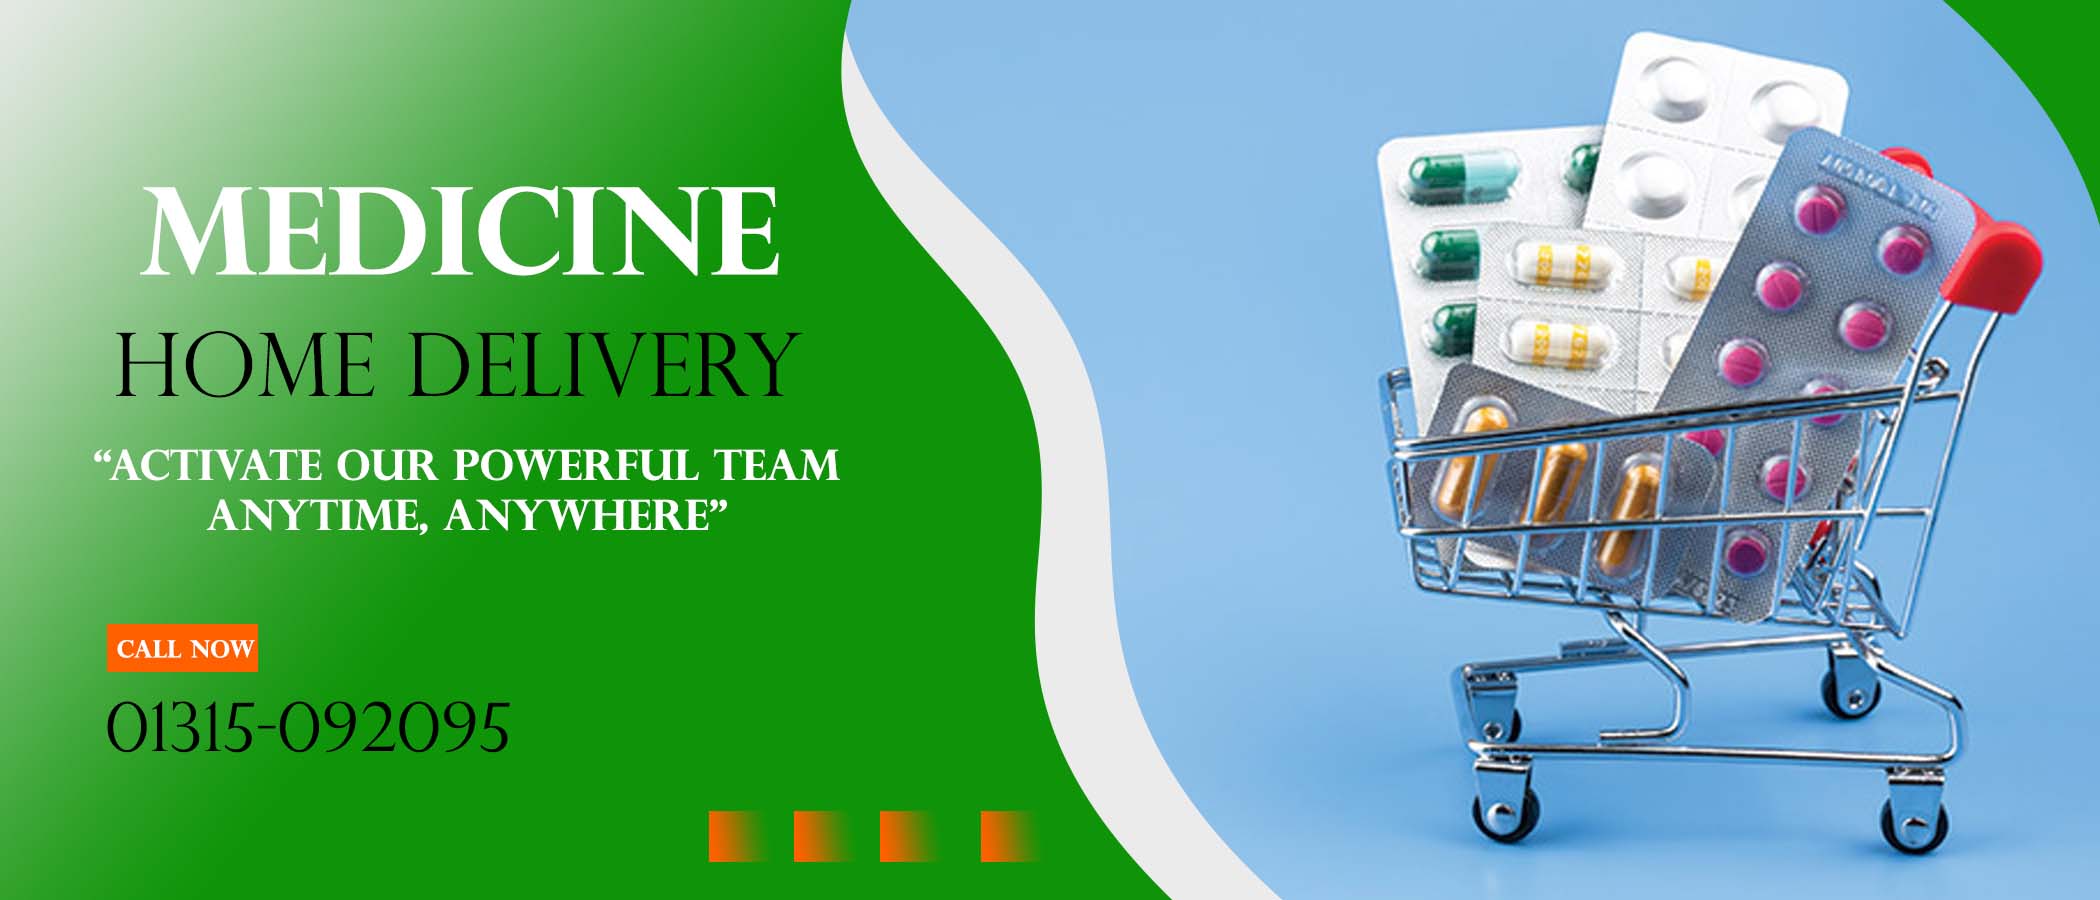 Medicine home delivery in Dhaka